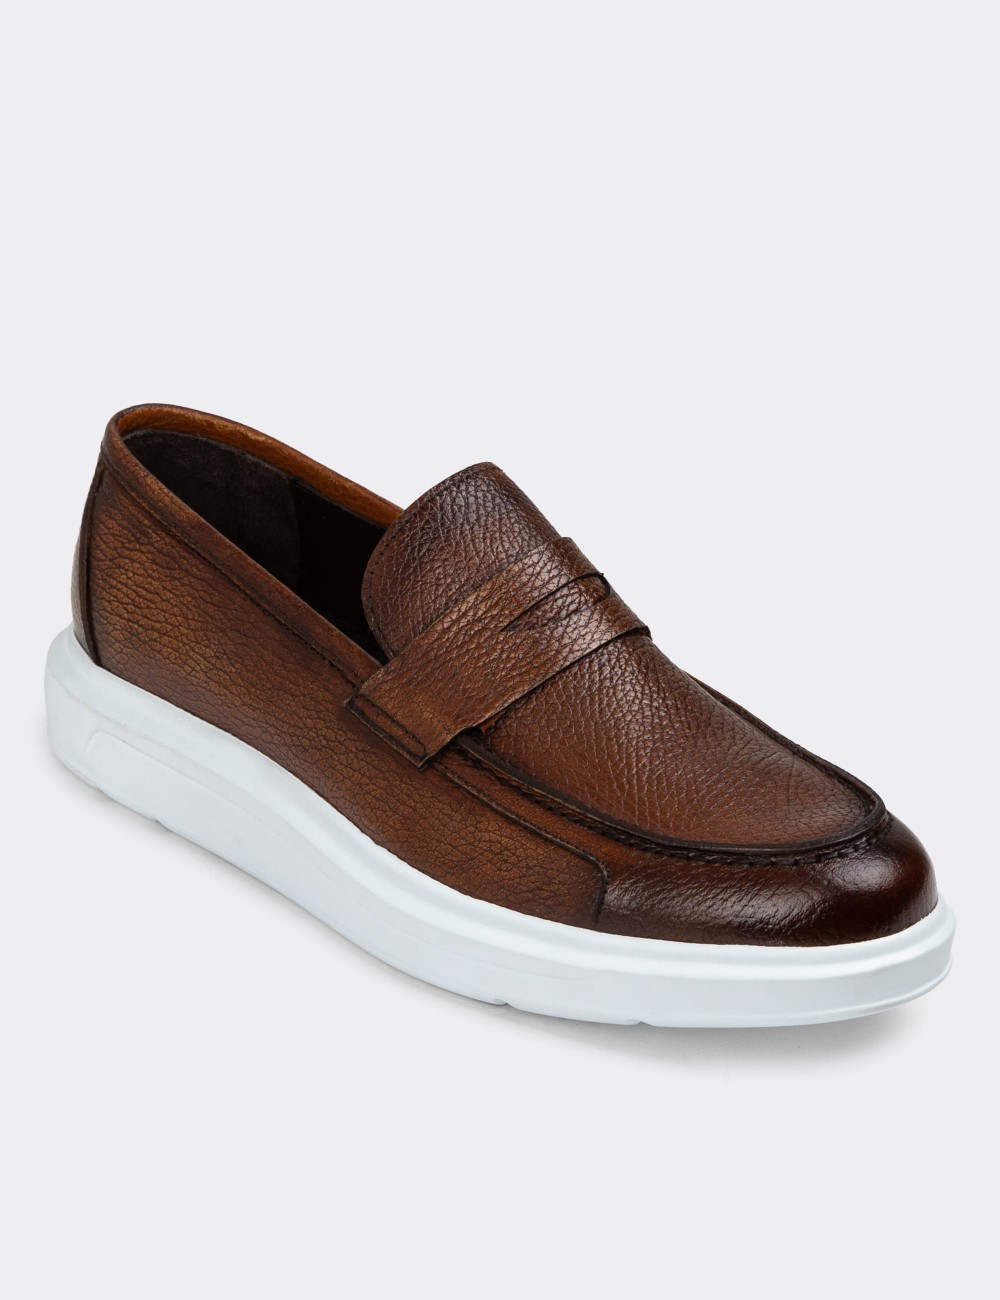 Copper Leather Comfort Loafers - 01564MBKRP01